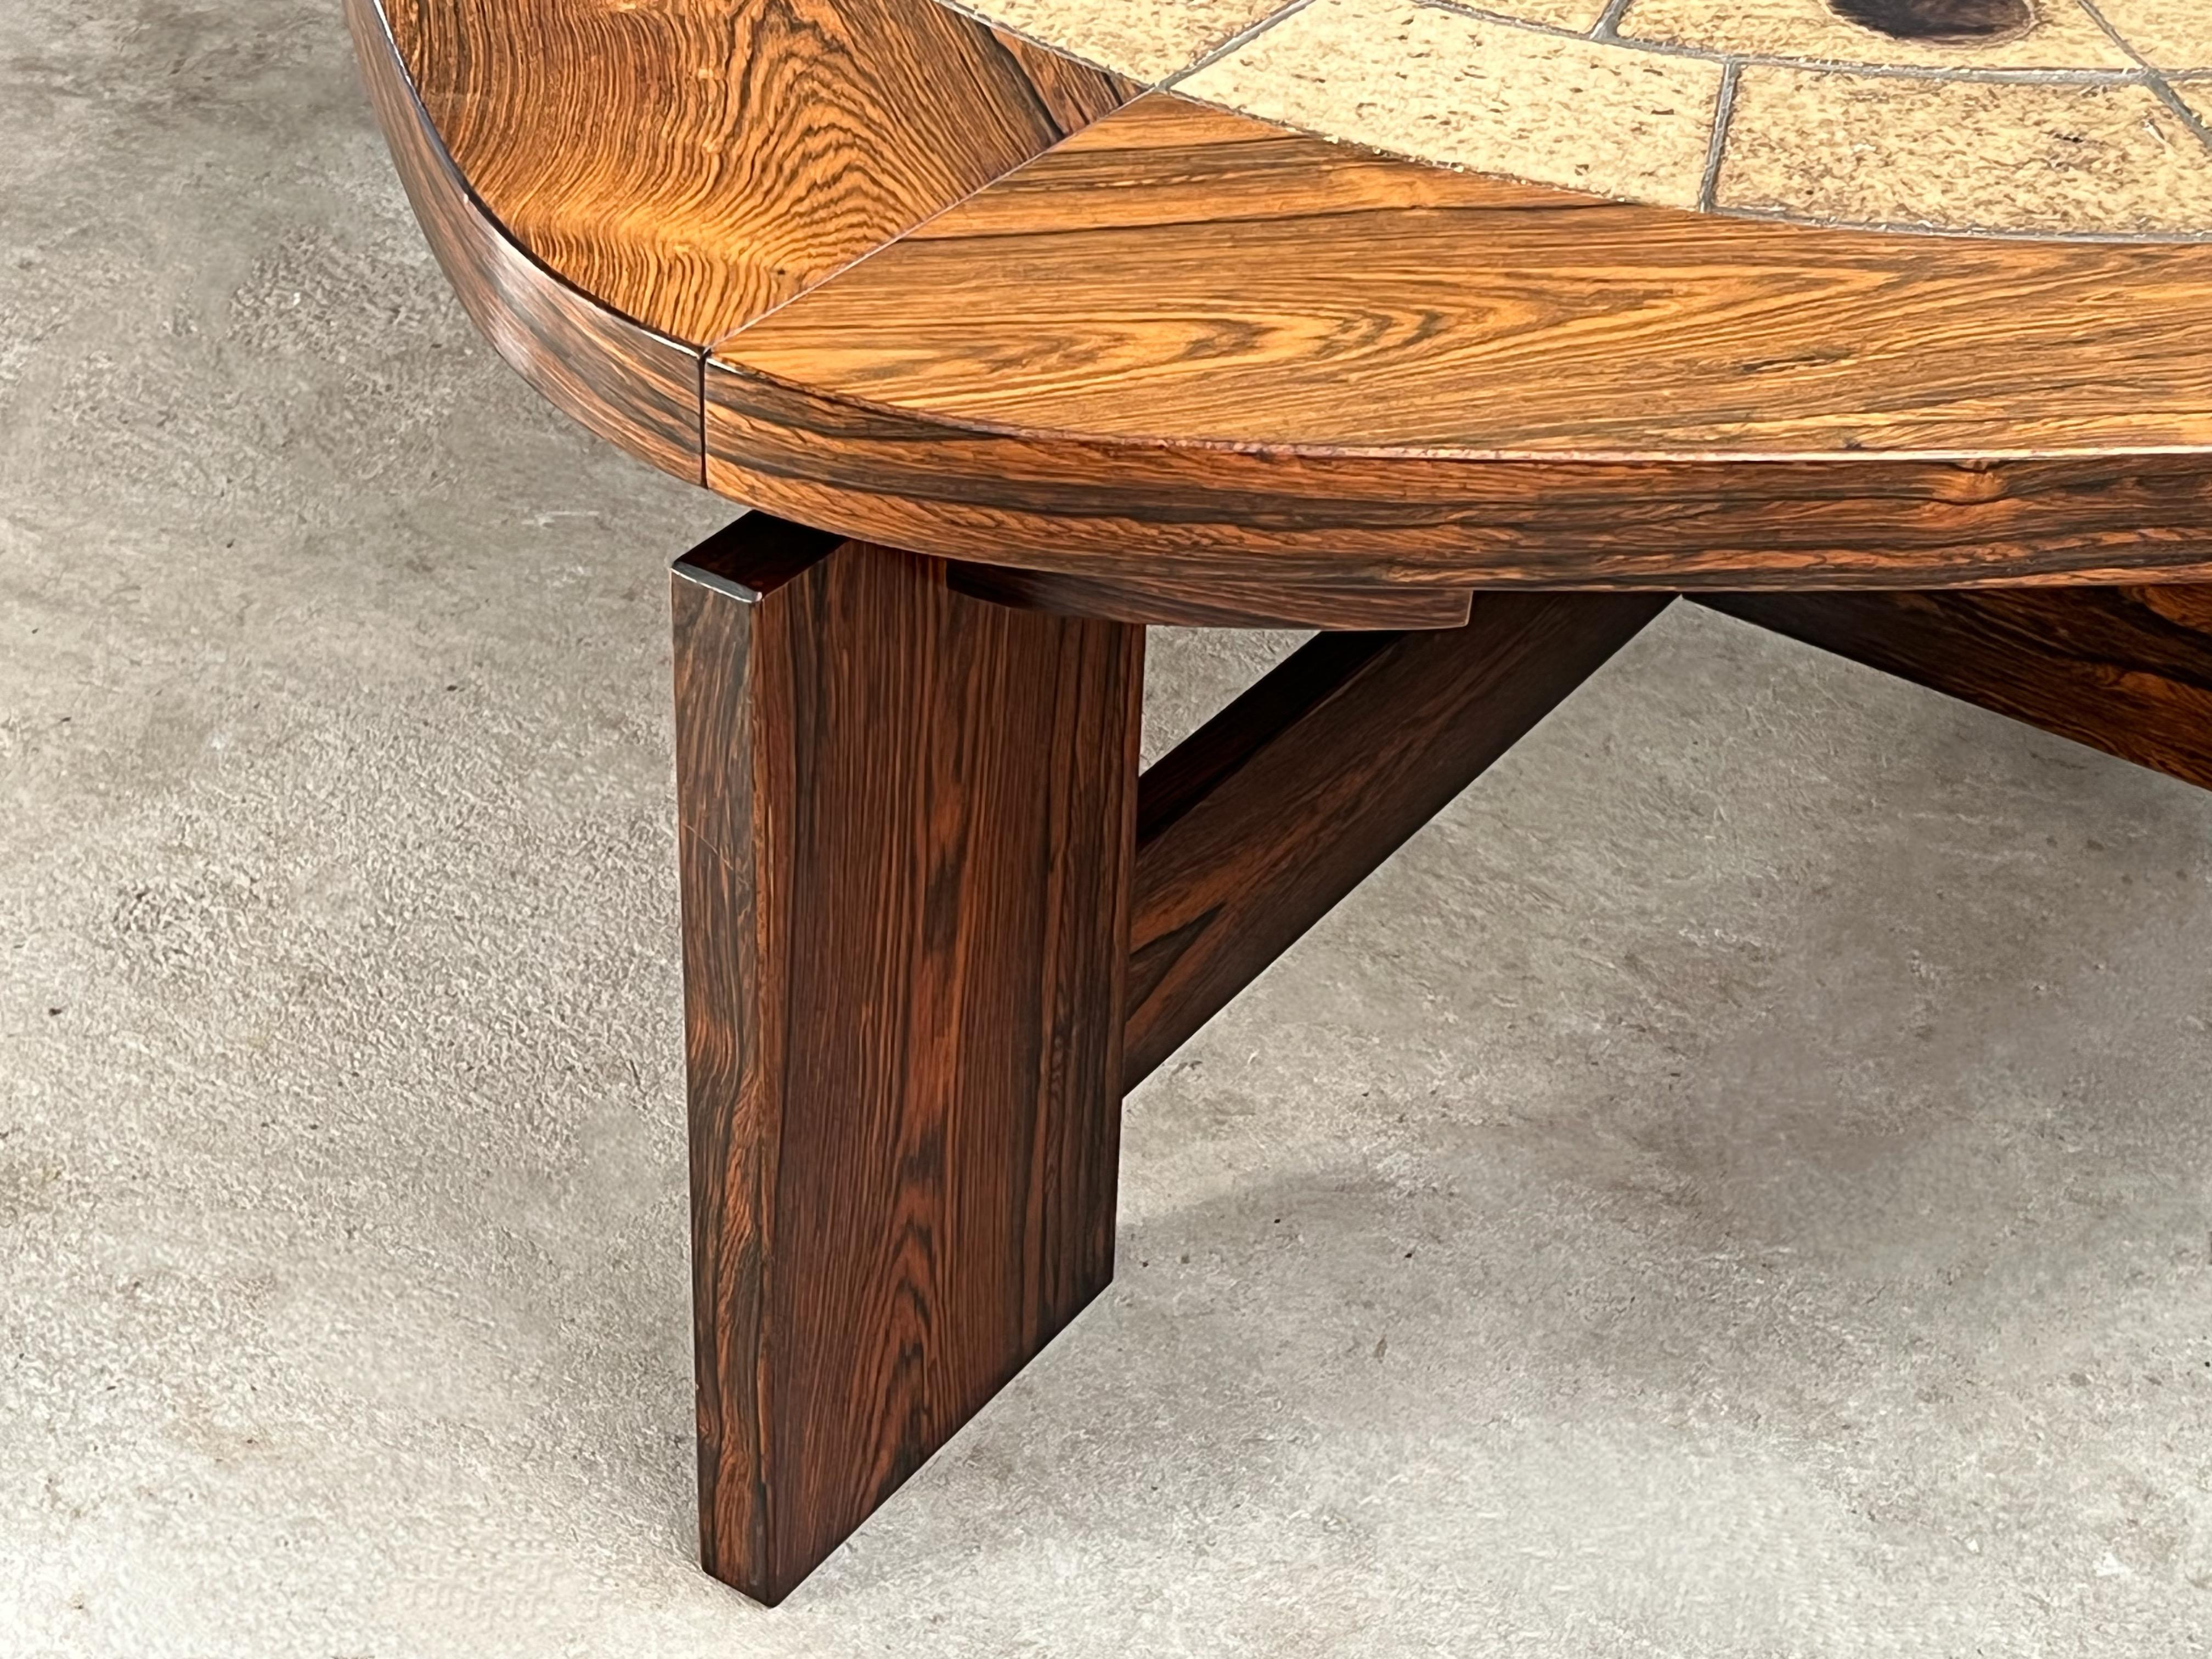 Brazilian Rosewood and Tile Coffee Table Attributed to Tue Poulsen 1